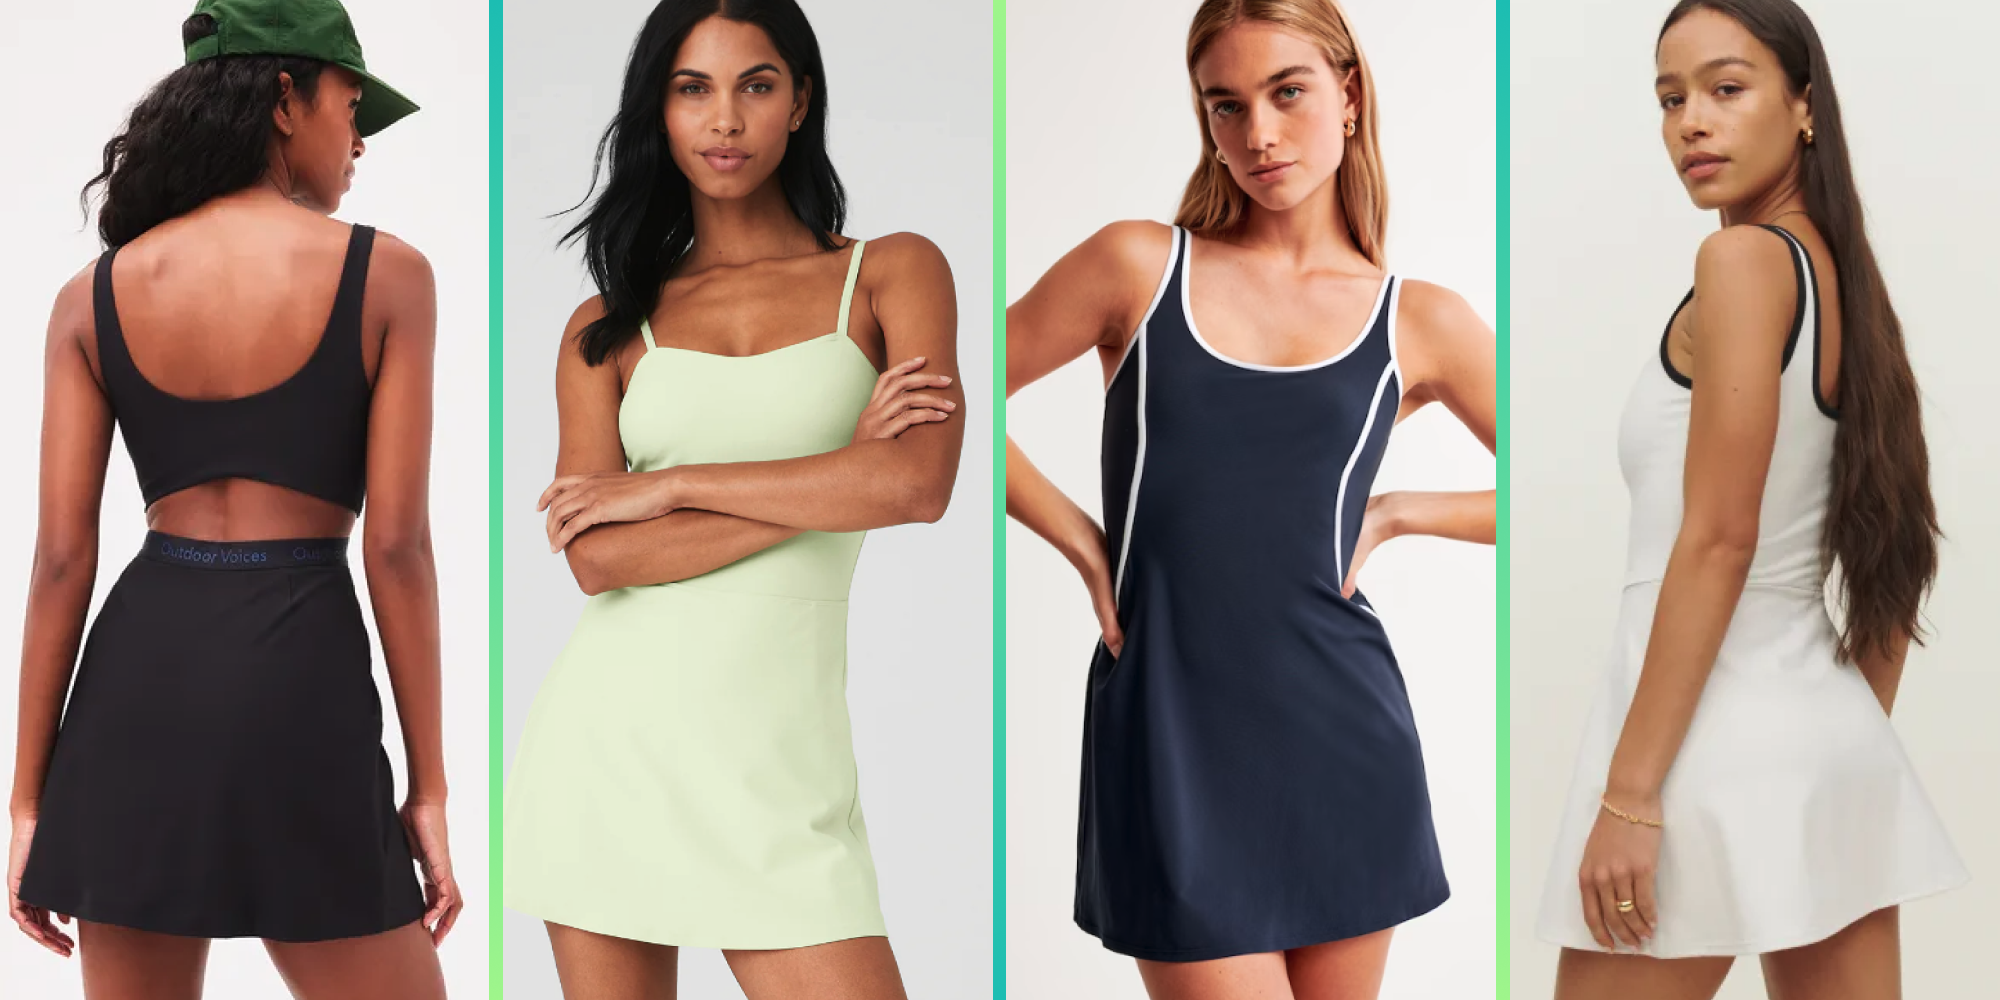  Heathyoga Tennis Dress, Cut Out Twisted Workout